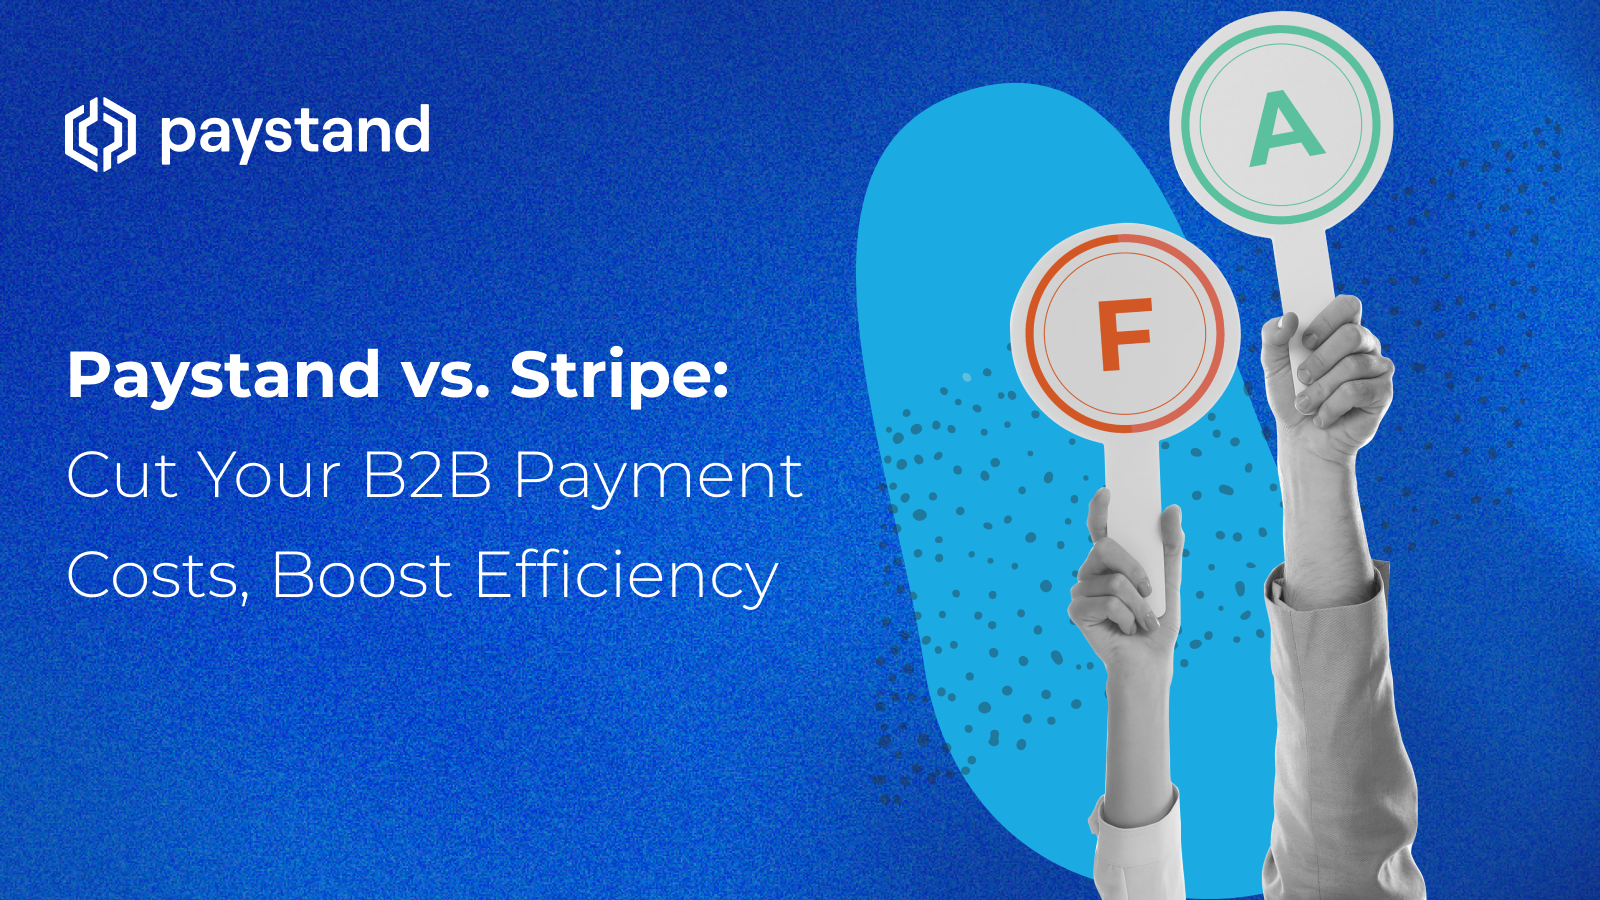 Paystand vs. Stripe: Cut Your B2B Payment Costs, Boost Efficiency